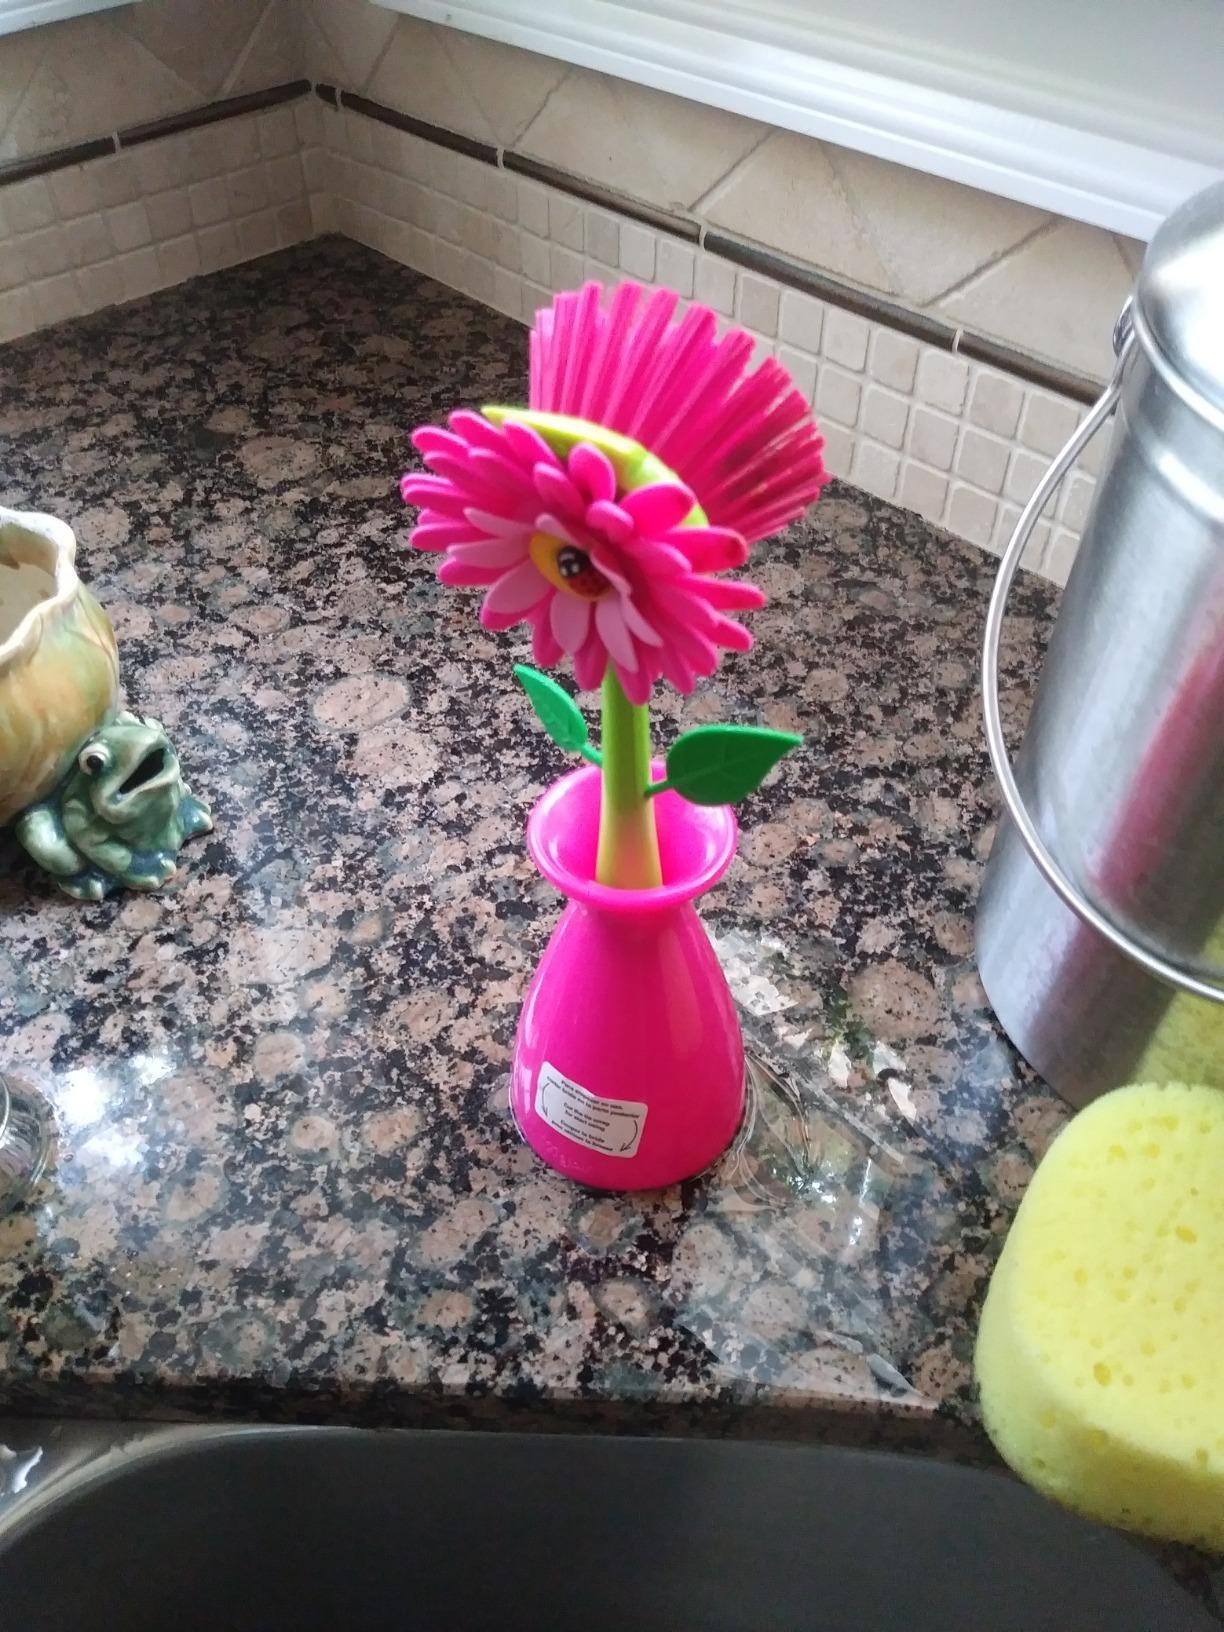  Vigar Flower Power Pink Dish Brush with Vase, 10-Inches, Pink,  Green : Health & Household